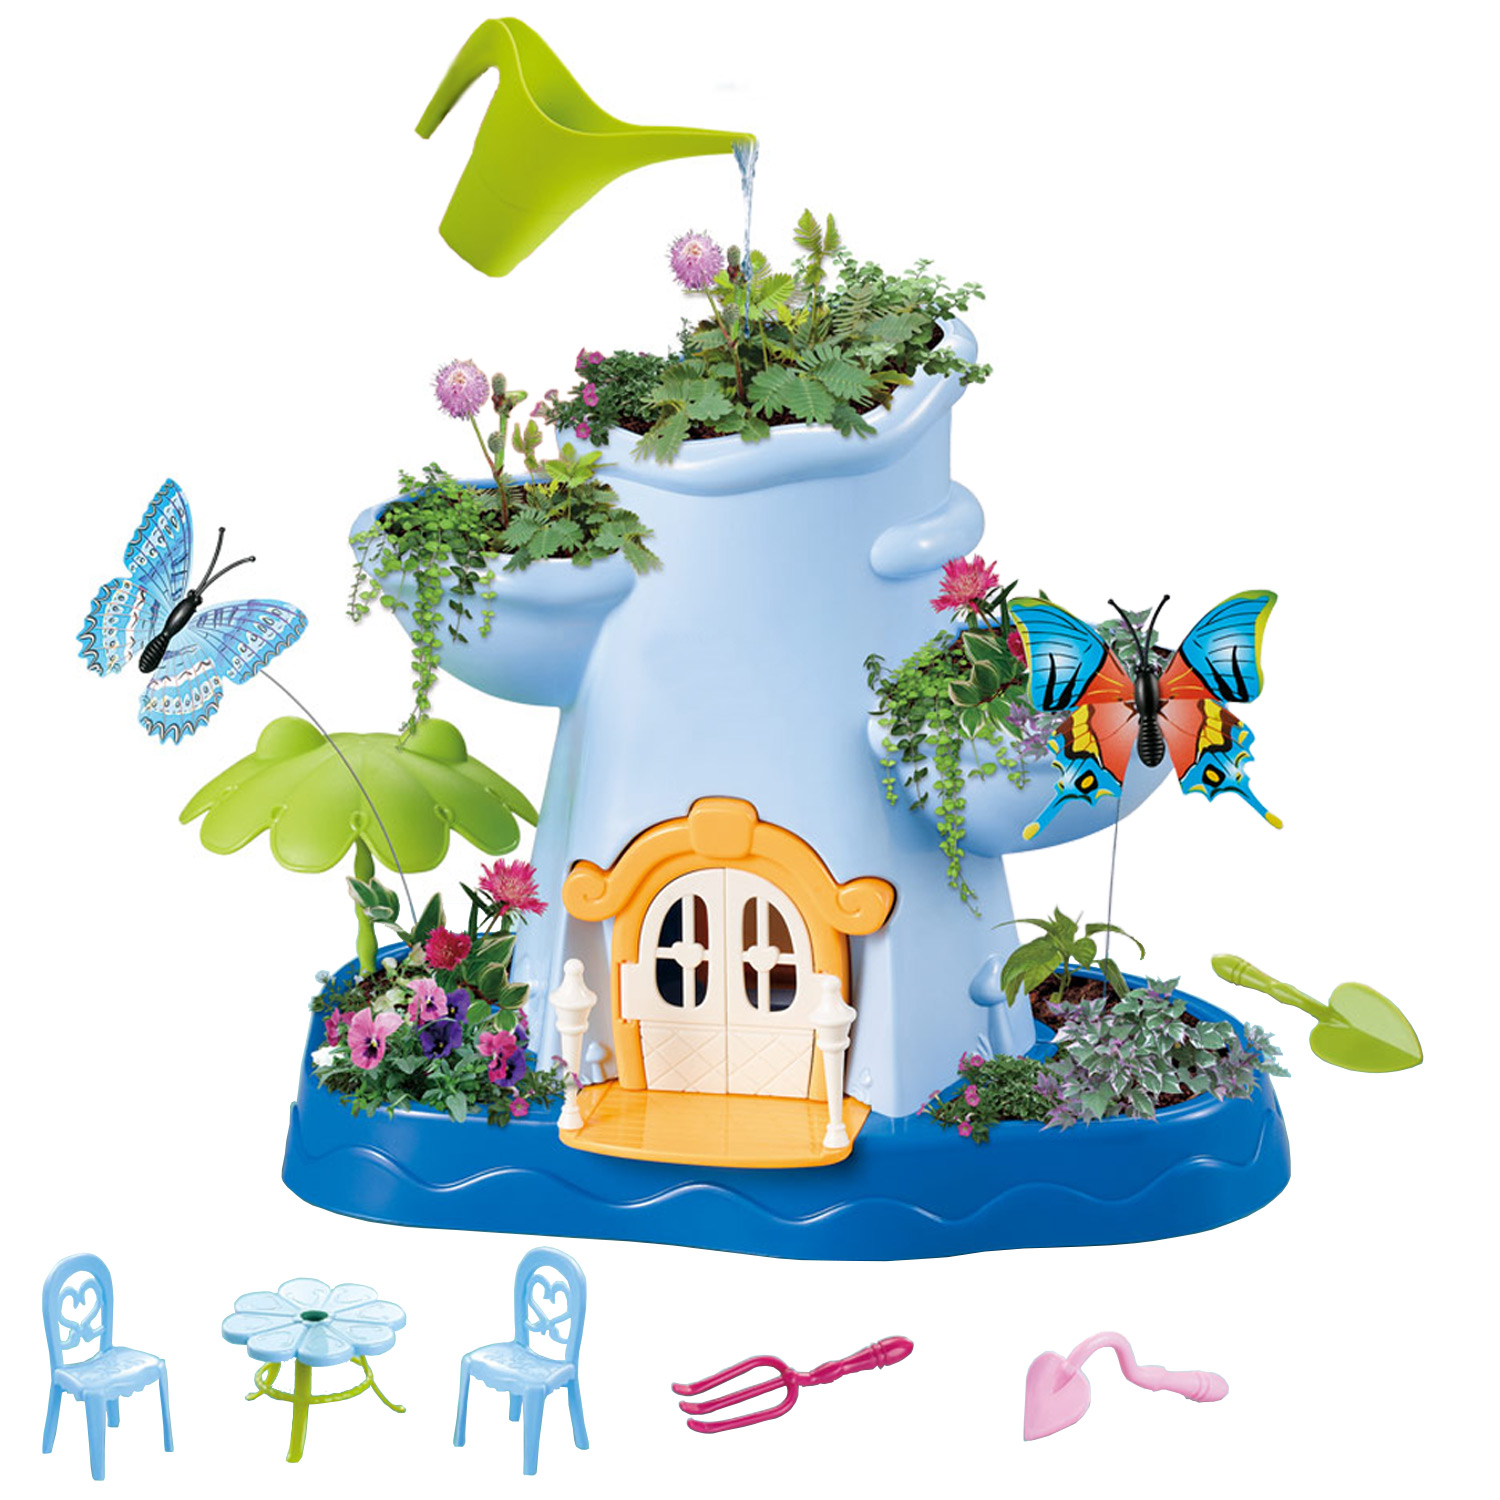 Kids Garden Growing Kit Includes Tool Set Flower Plant Tree Interactive Indoor Outdoor Play Activity Fairy Toys Inspires Learning Educational Ecological Cultivation Perfect For Children Kids Toddlers Girls Boys